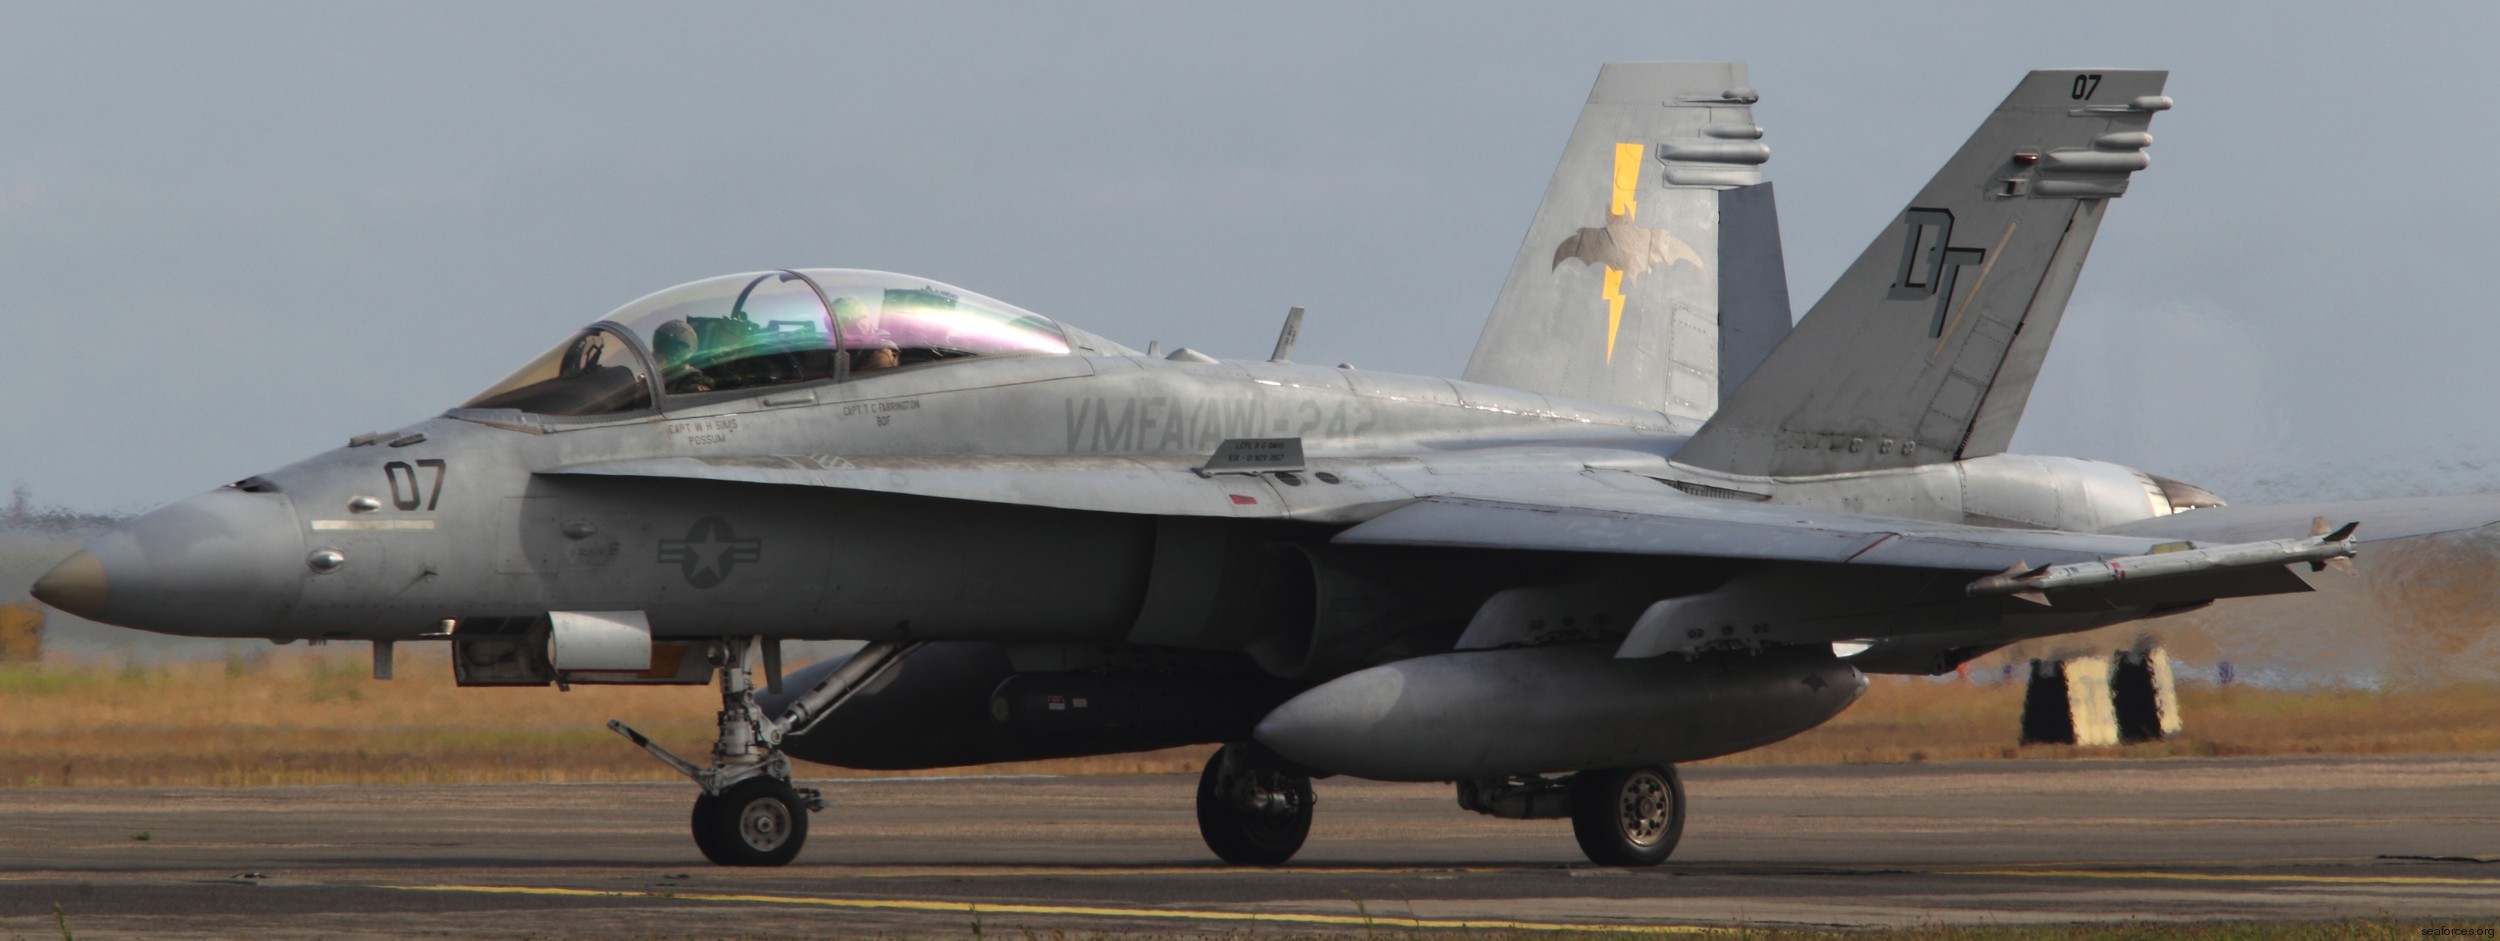 vmfa(aw)-242 bats marine all-weather fighter attack squadron usmc f/a-18d hornet 19